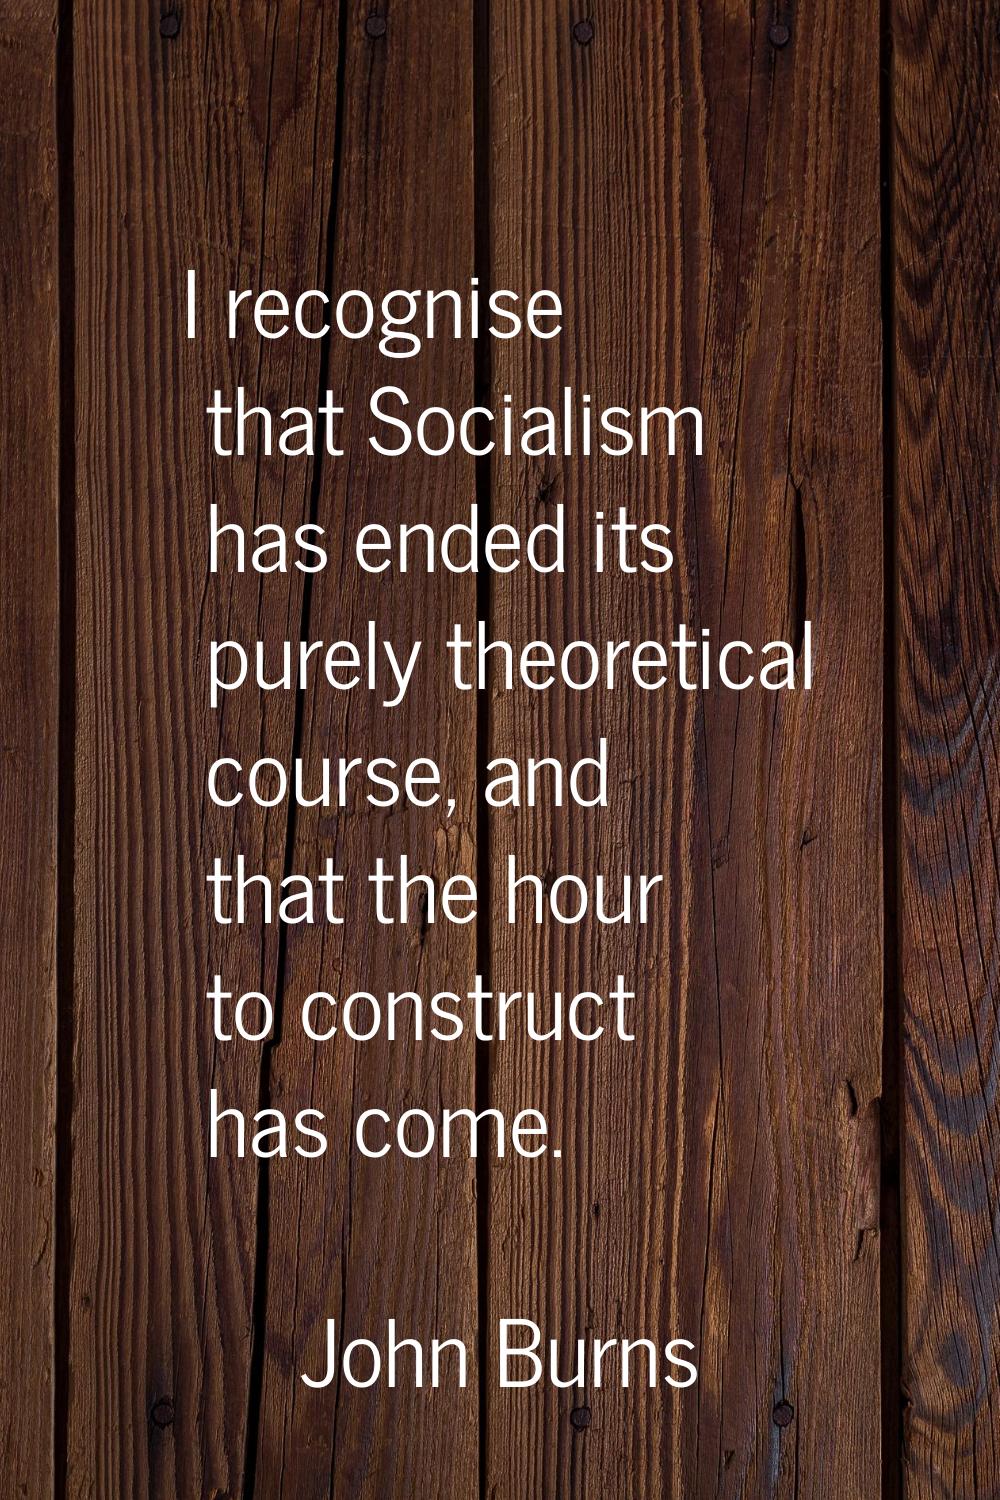 I recognise that Socialism has ended its purely theoretical course, and that the hour to construct 